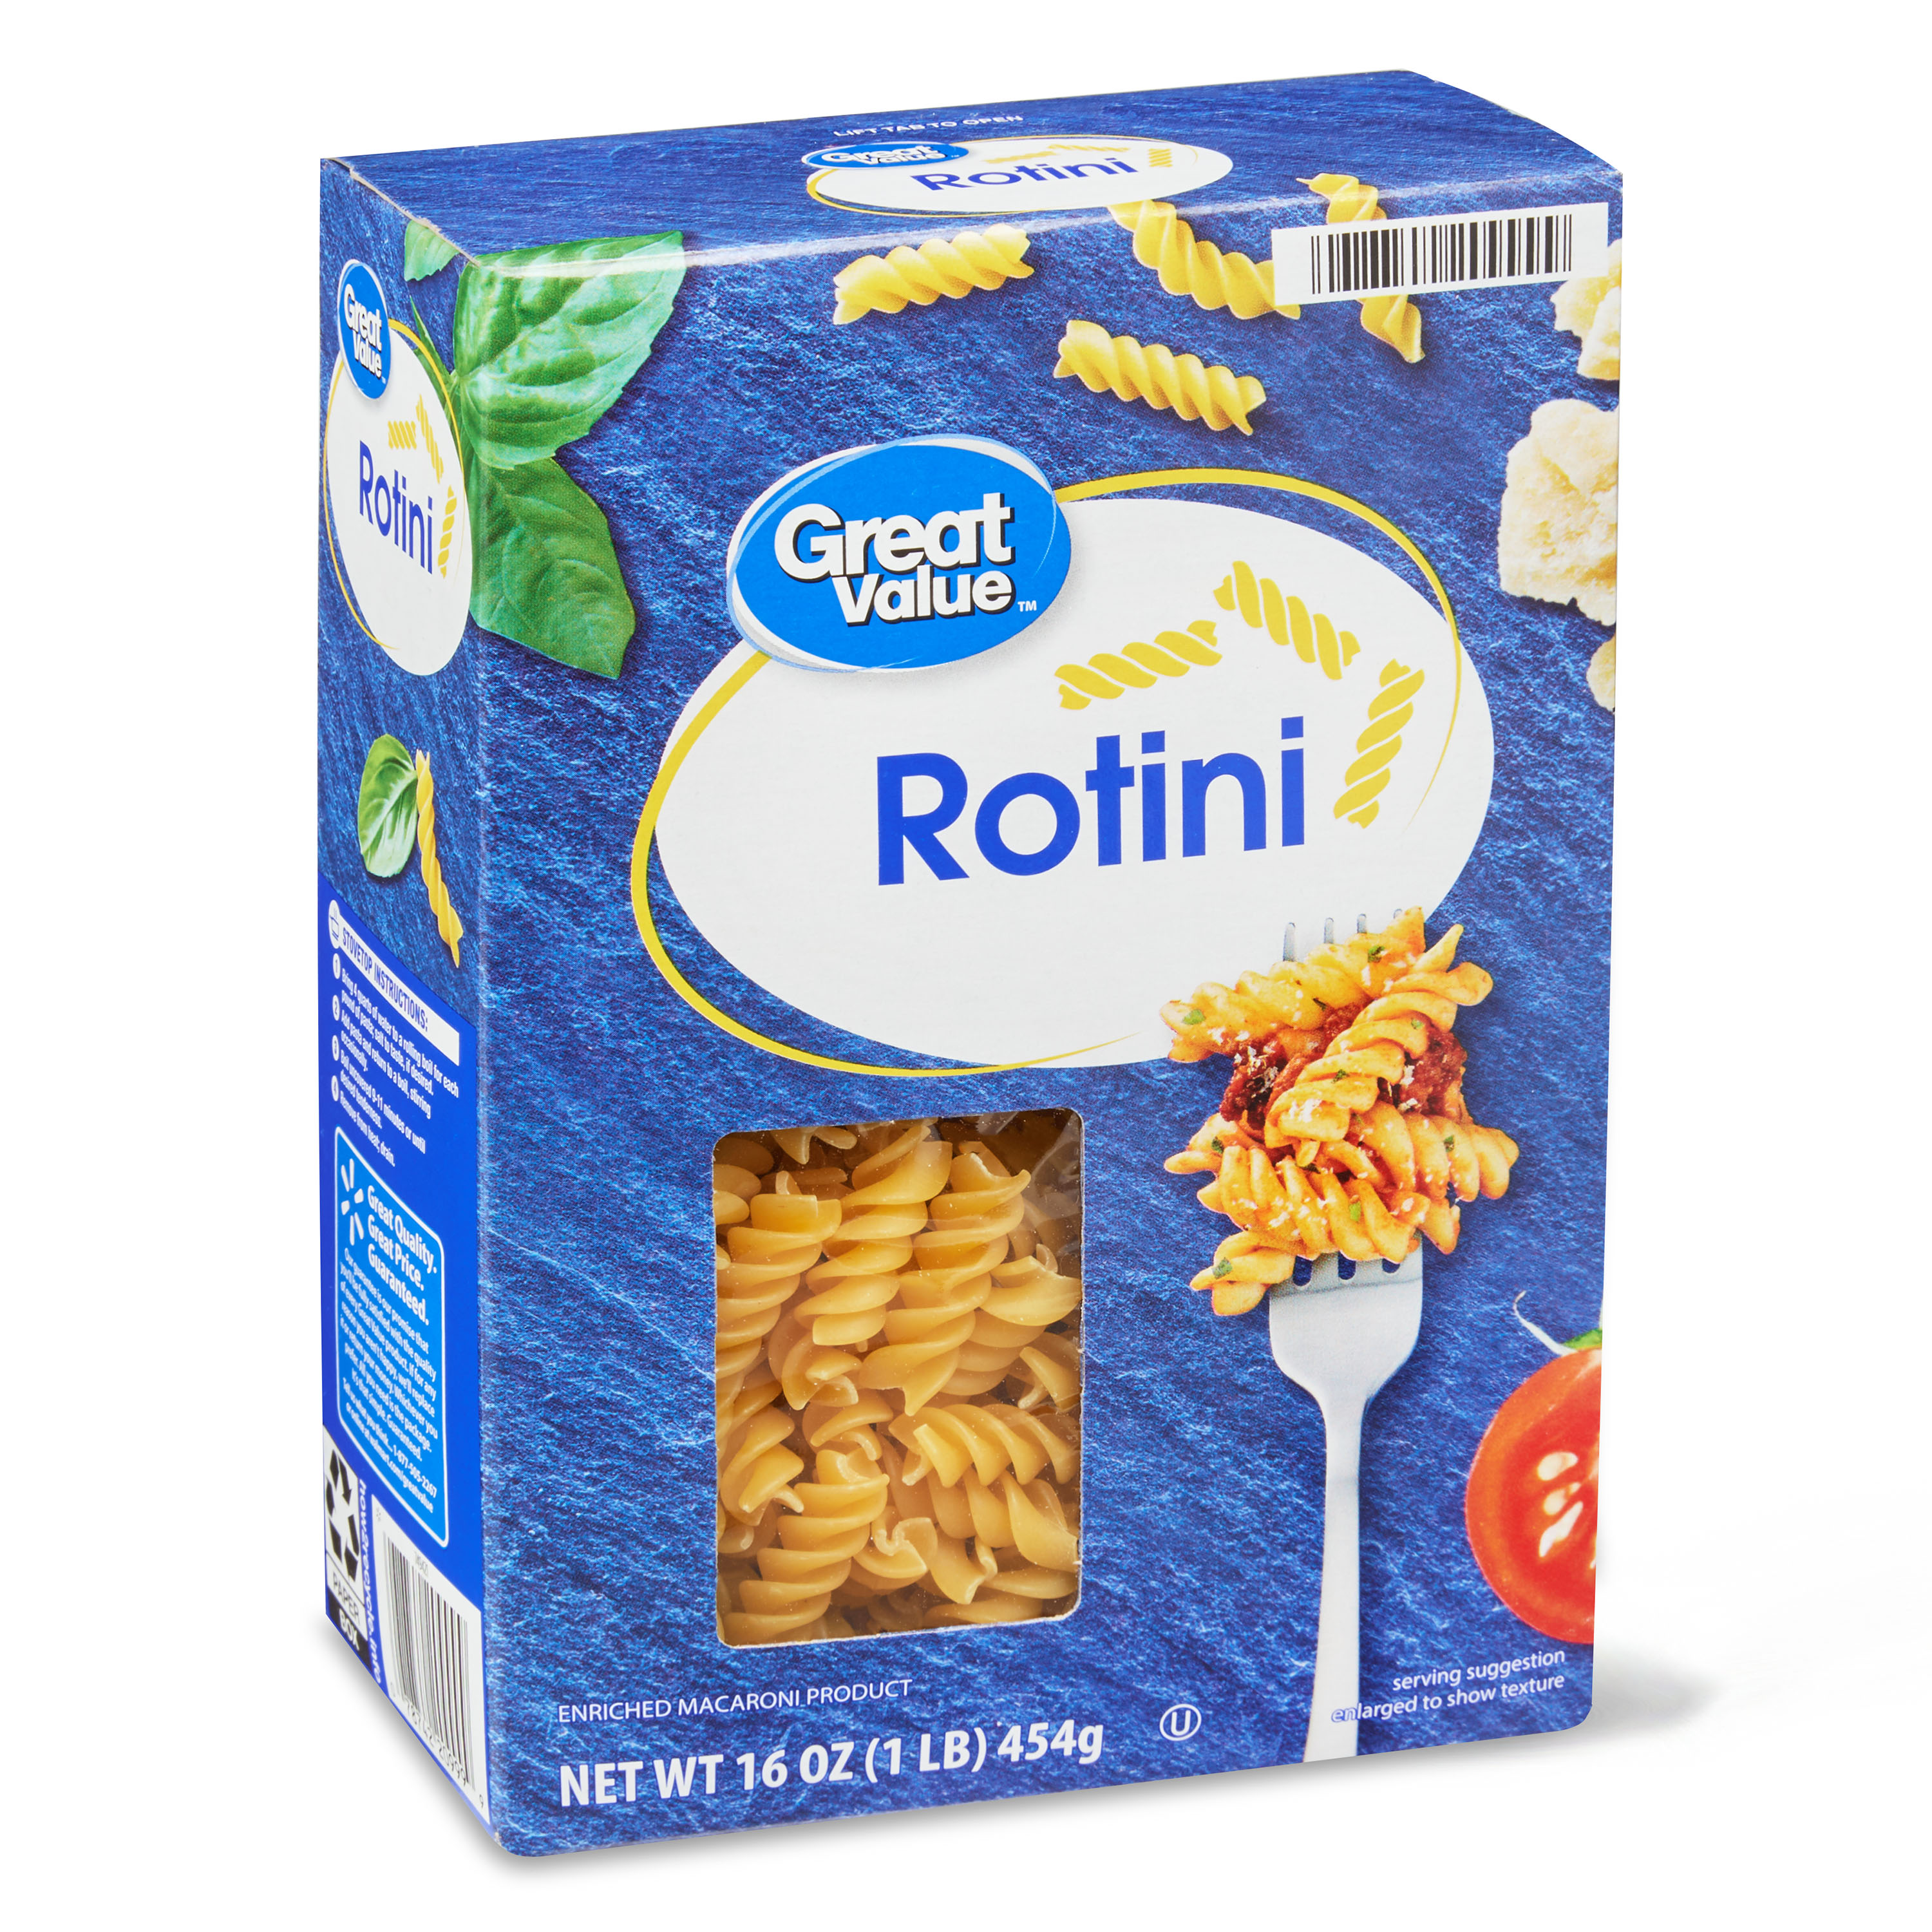 (4 Pack) Great Value Rotini, 16 Oz Image